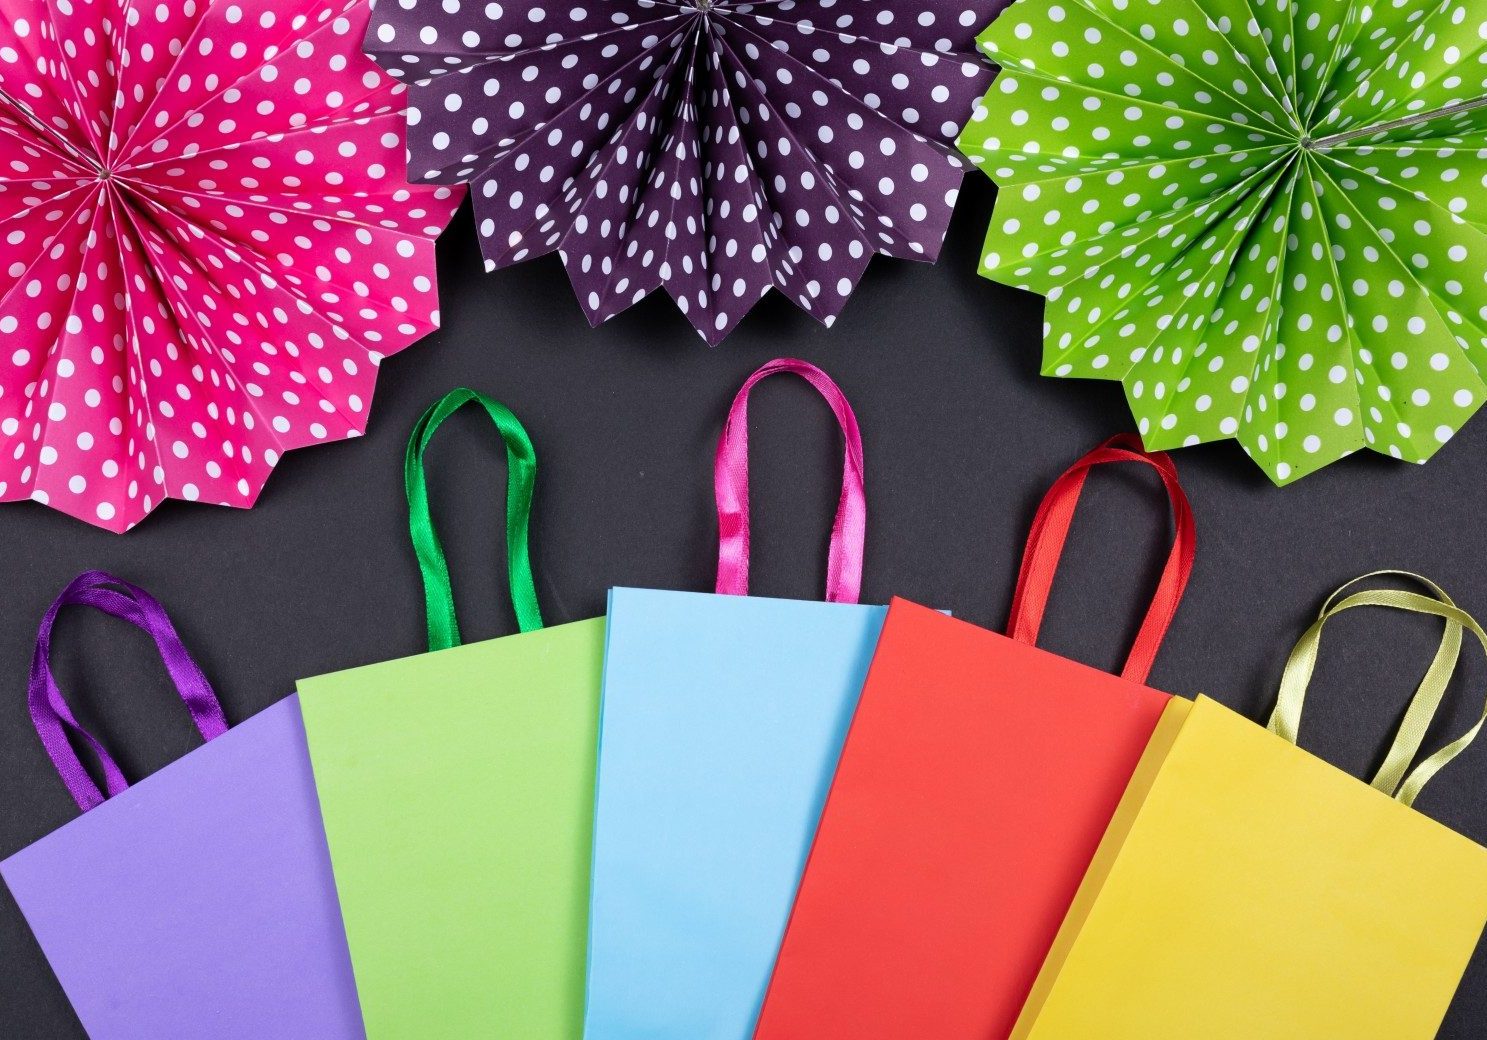 pink green and yellow paper bags